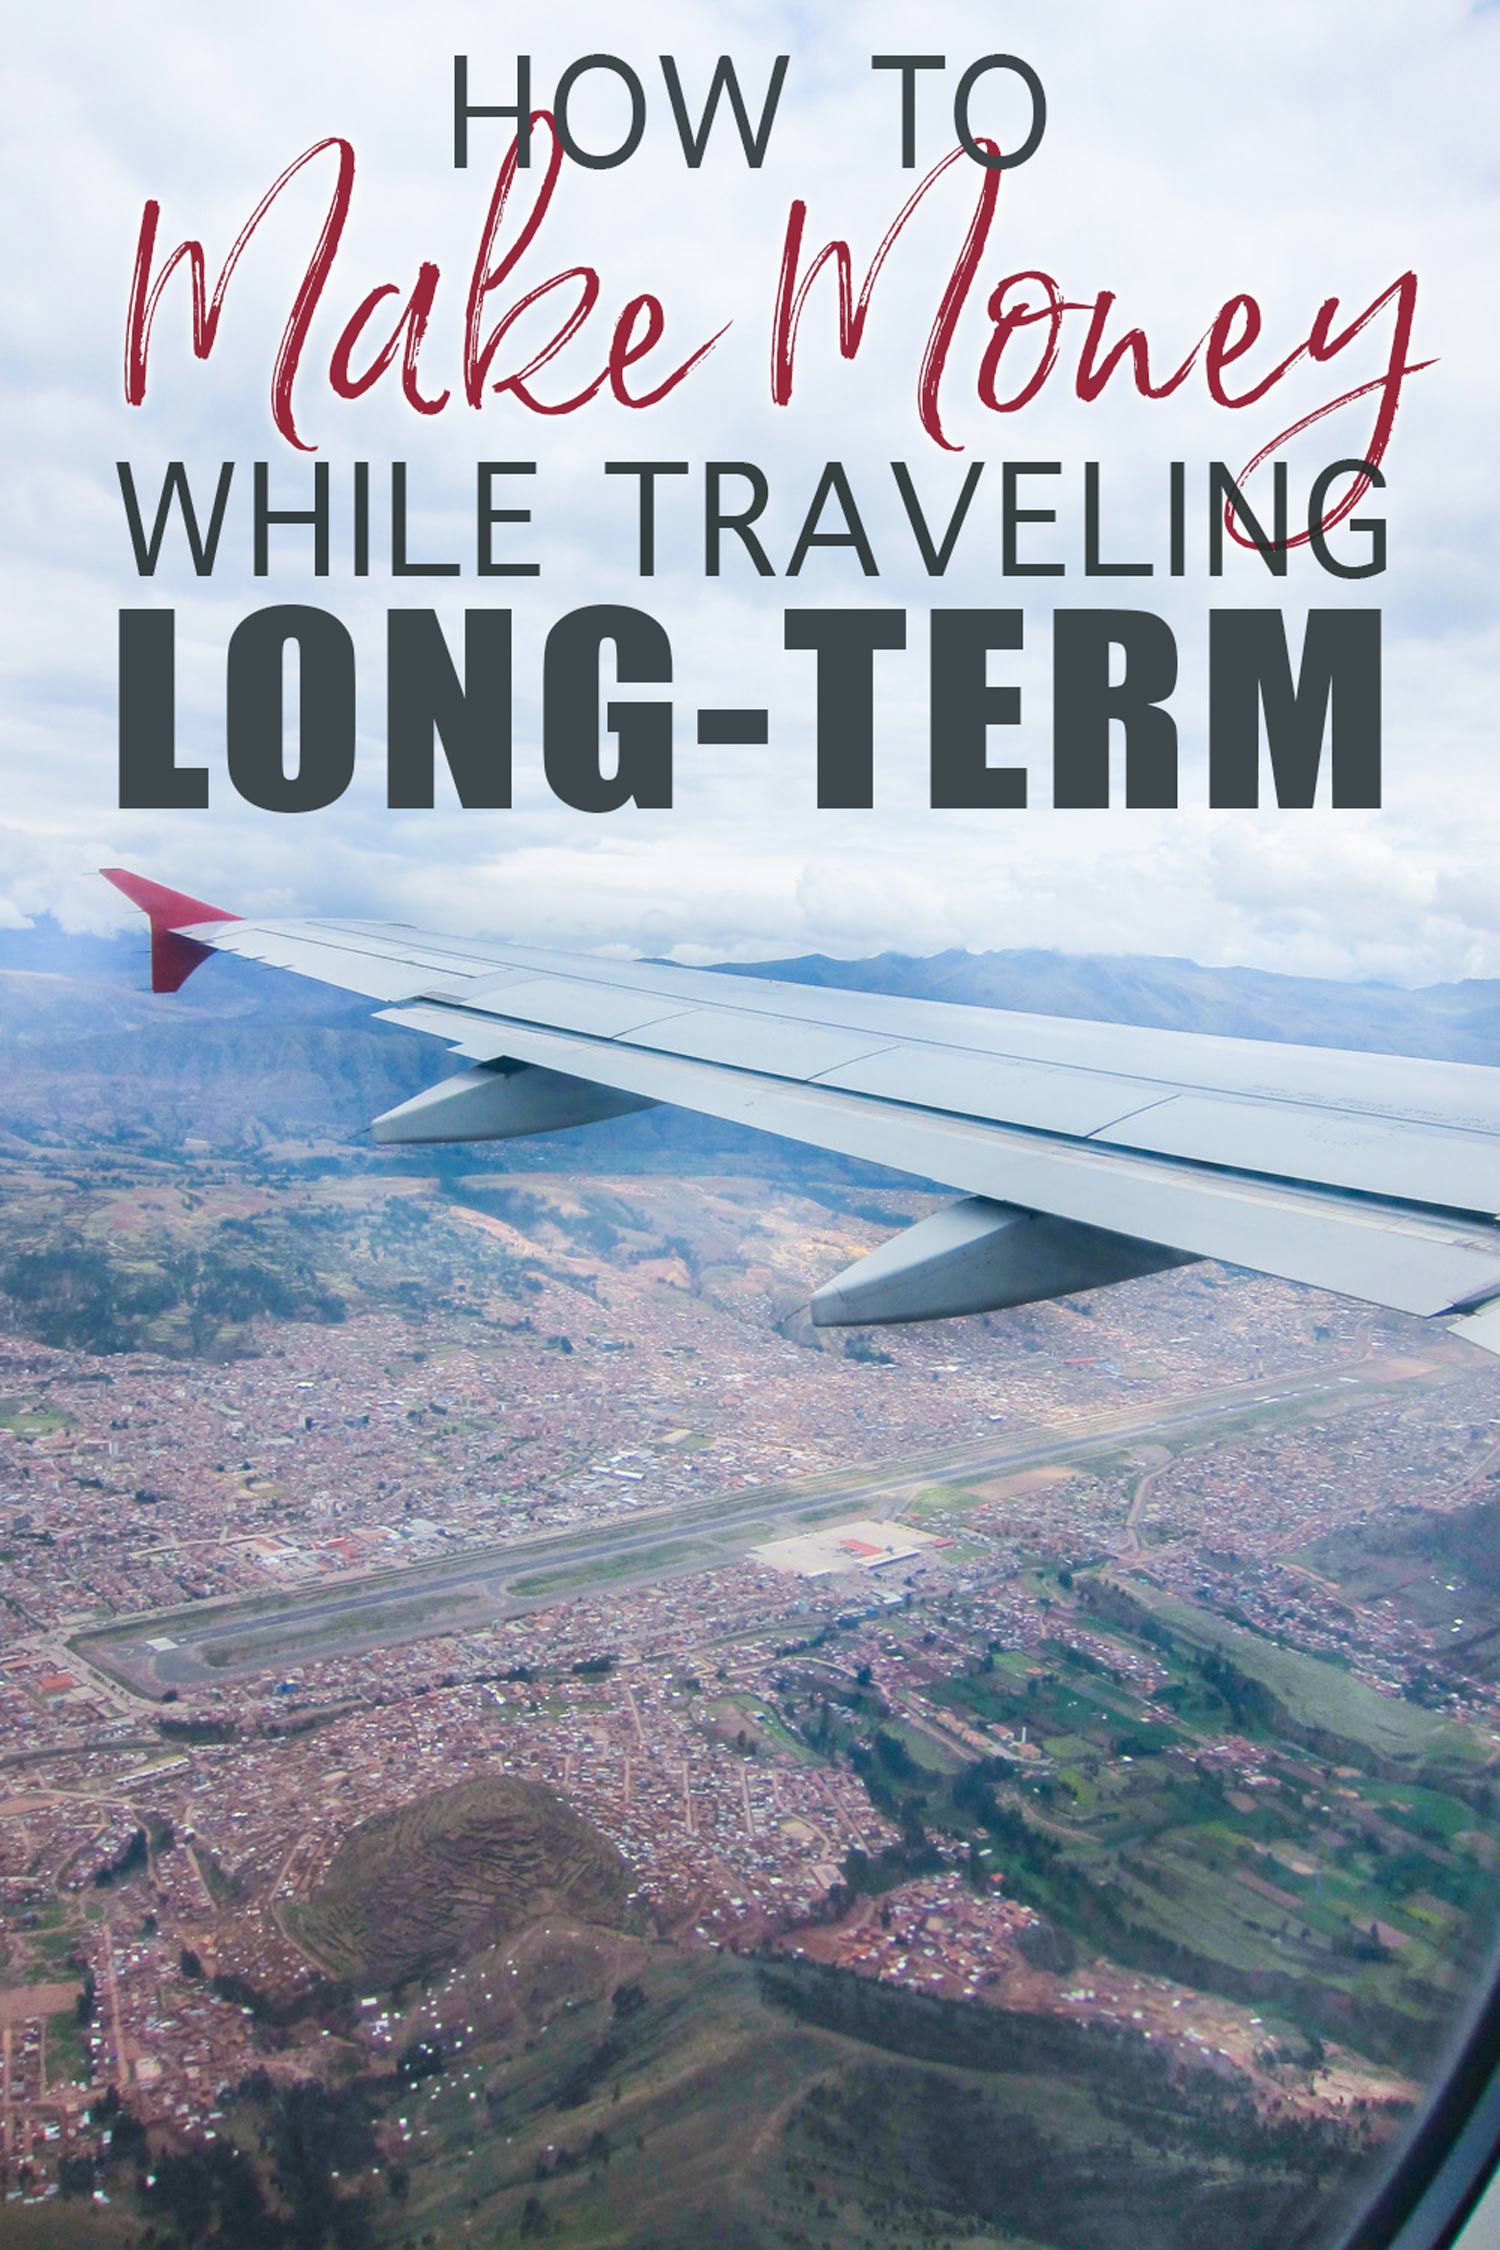 How to Make Money While Traveling Long-Term